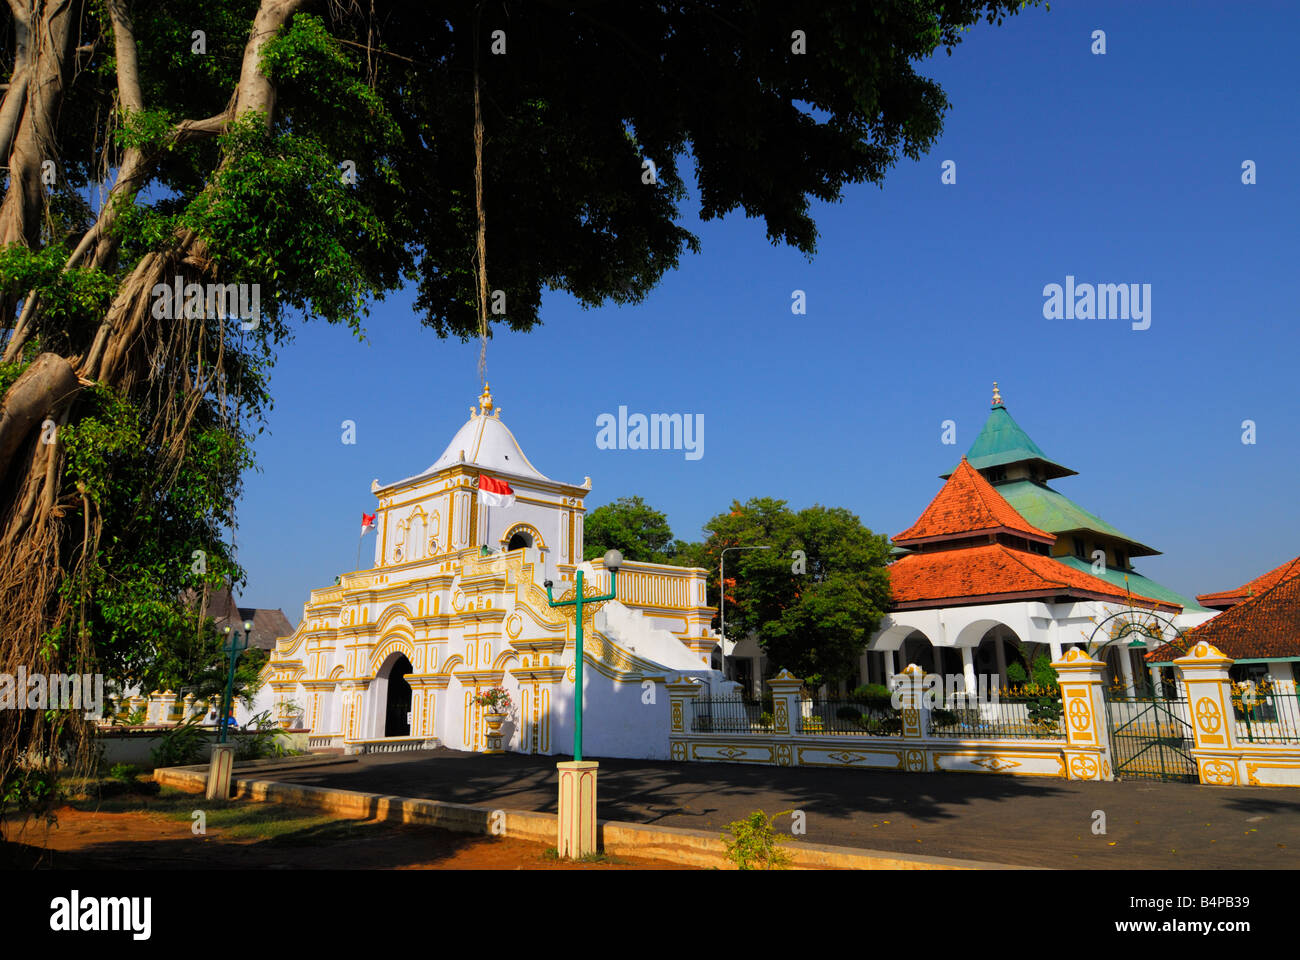 The holly building of Masjid Jamik mosque at daylight Stock Photo